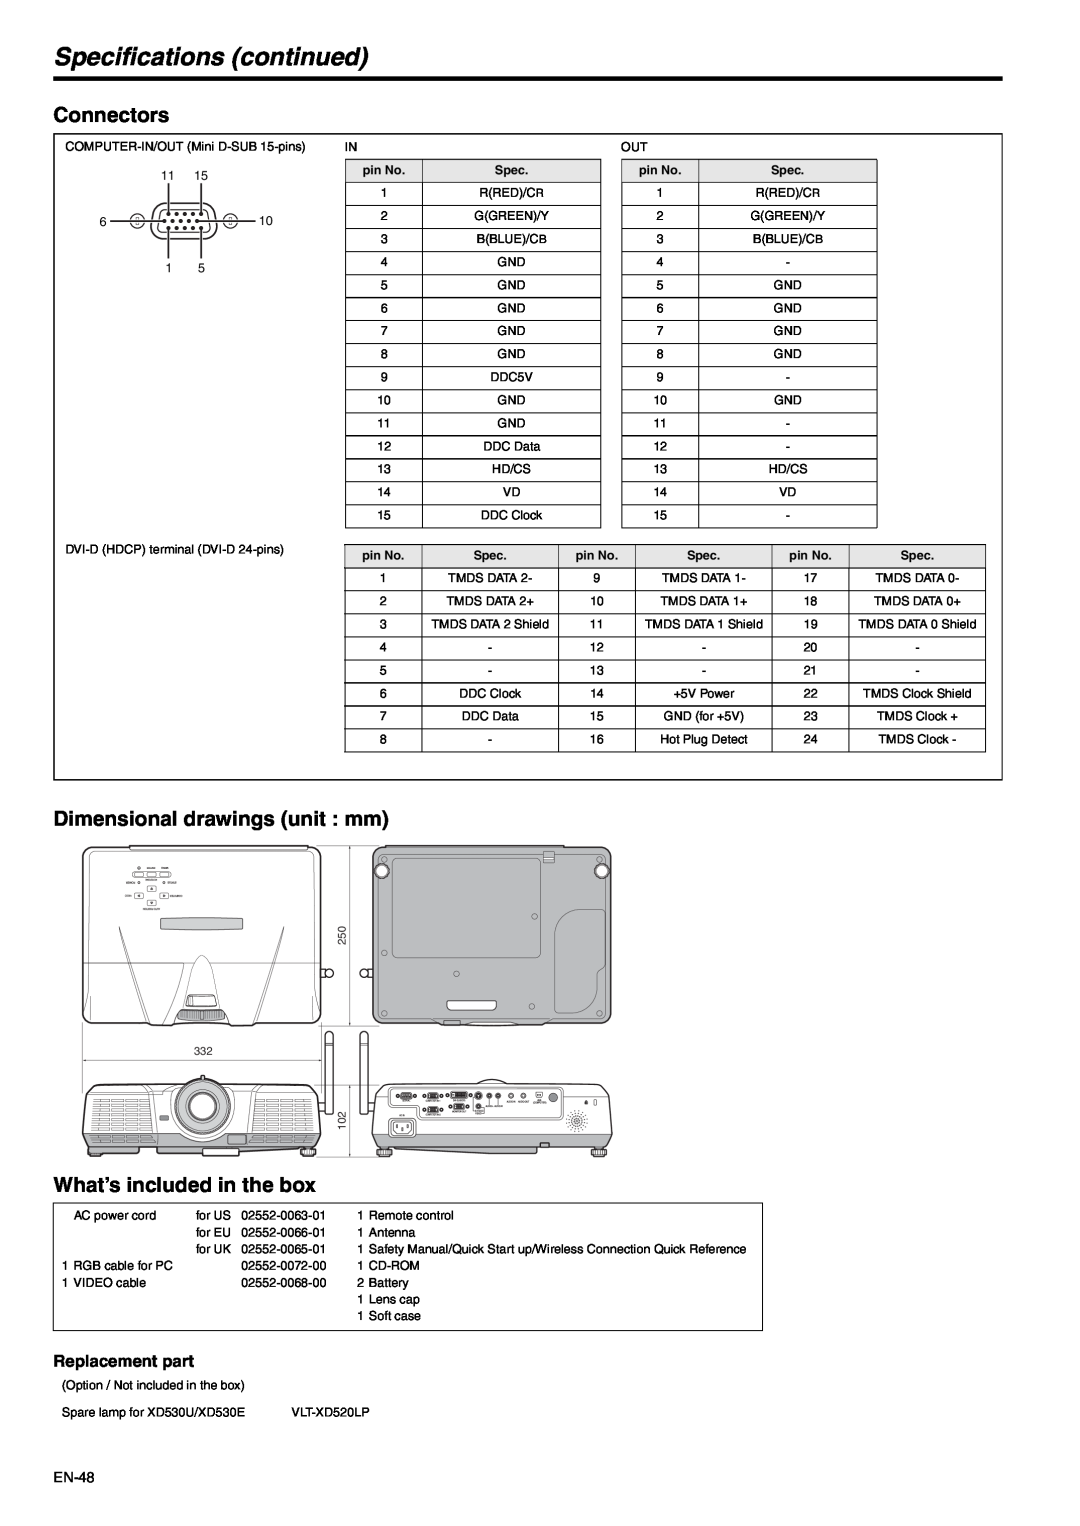 Mitsubishi Electronics XD530U Specifications continued, Connectors, Dimensional drawings unit mm, Replacement part, pin No 